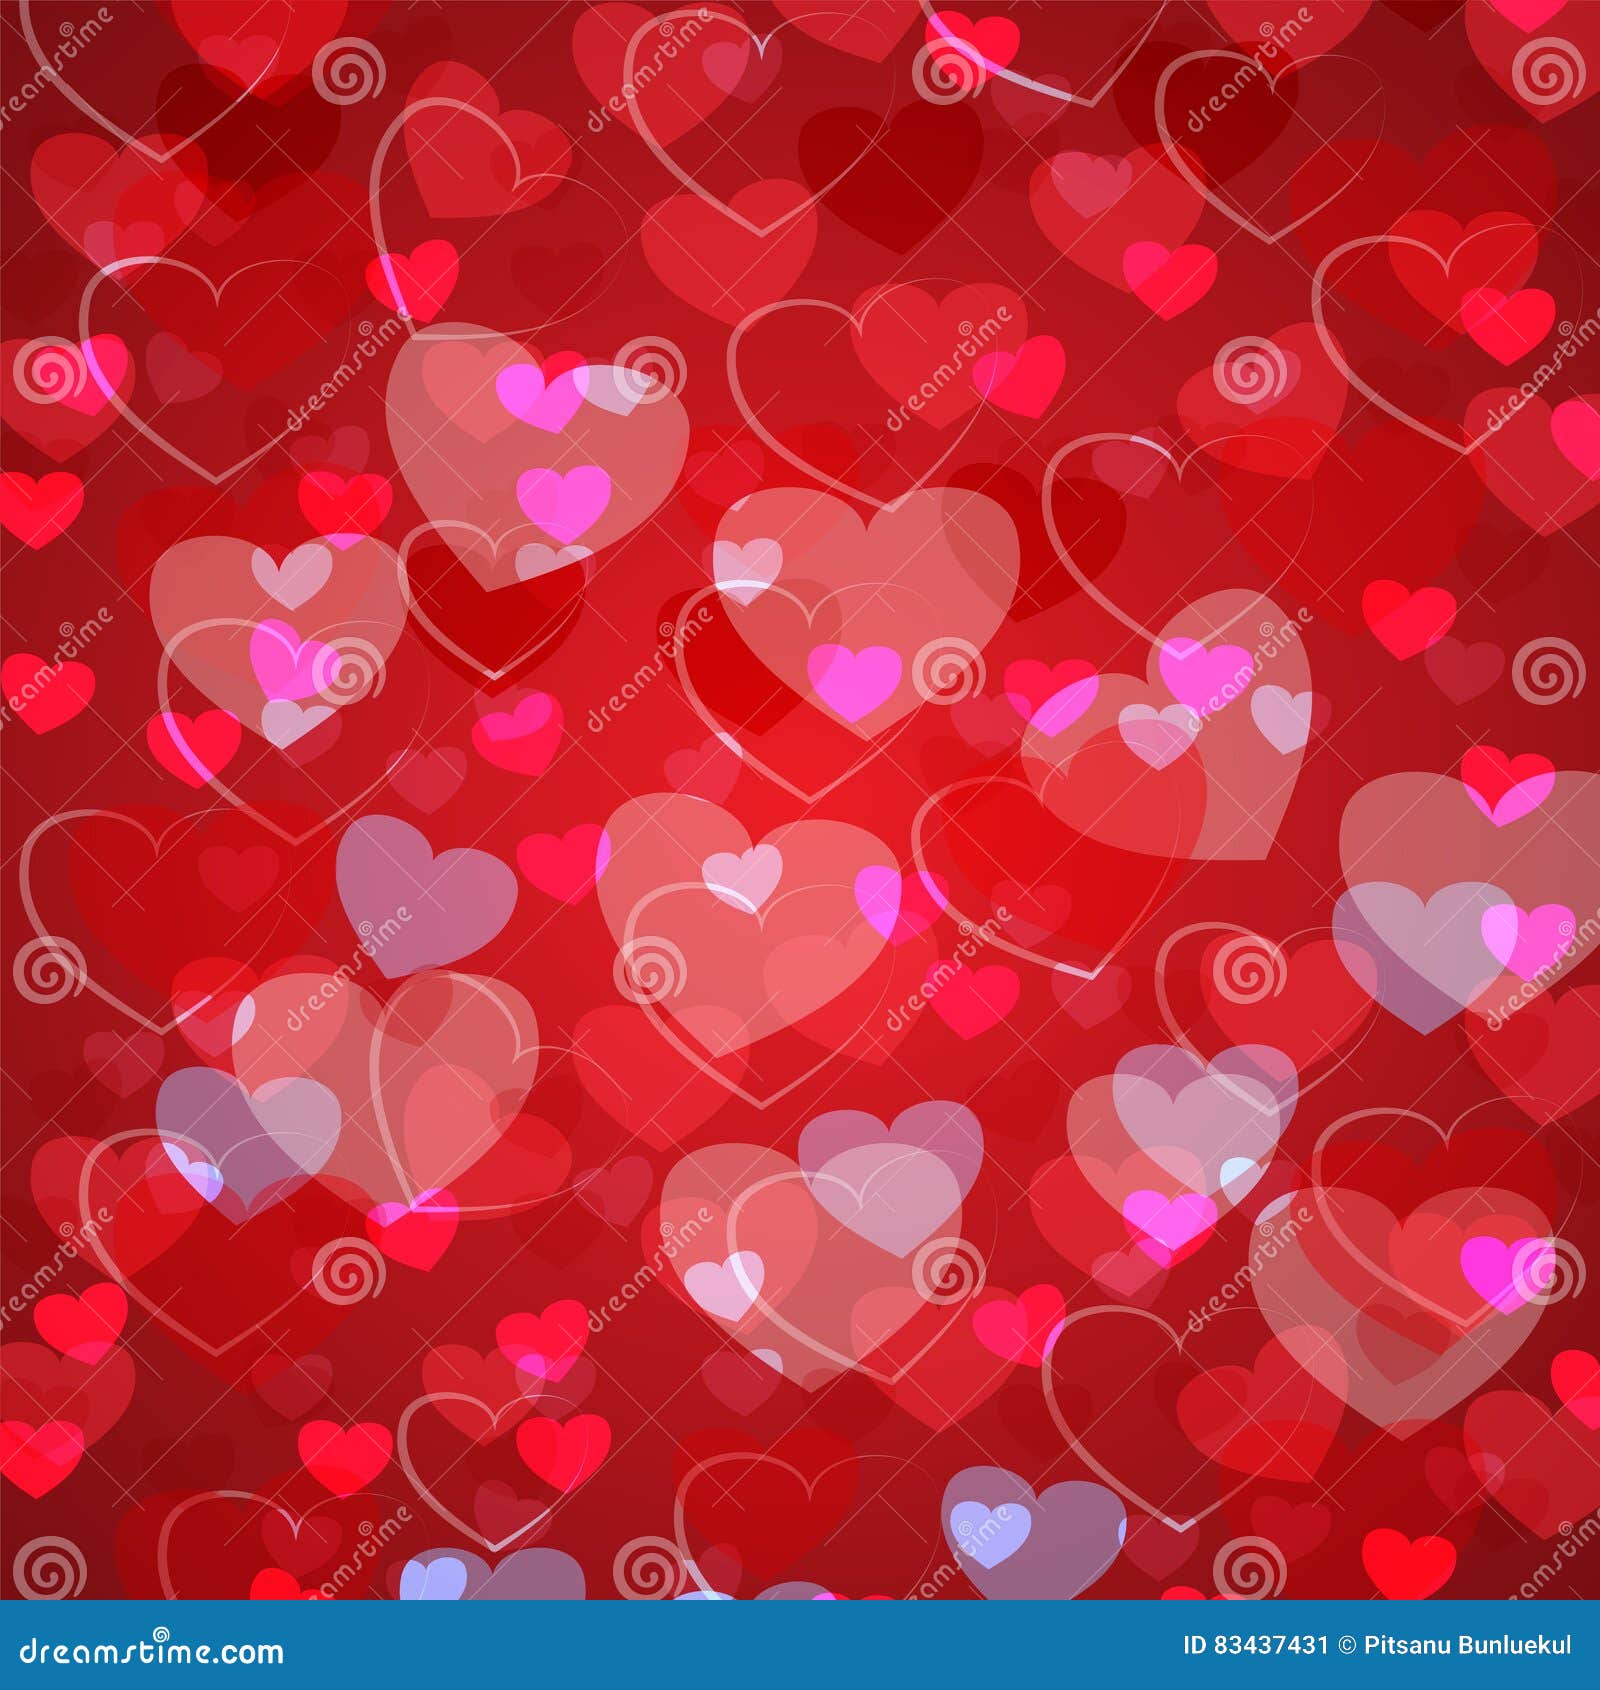 Abstract Hearts Background for Valentines Card or Poster Stock Vector ...